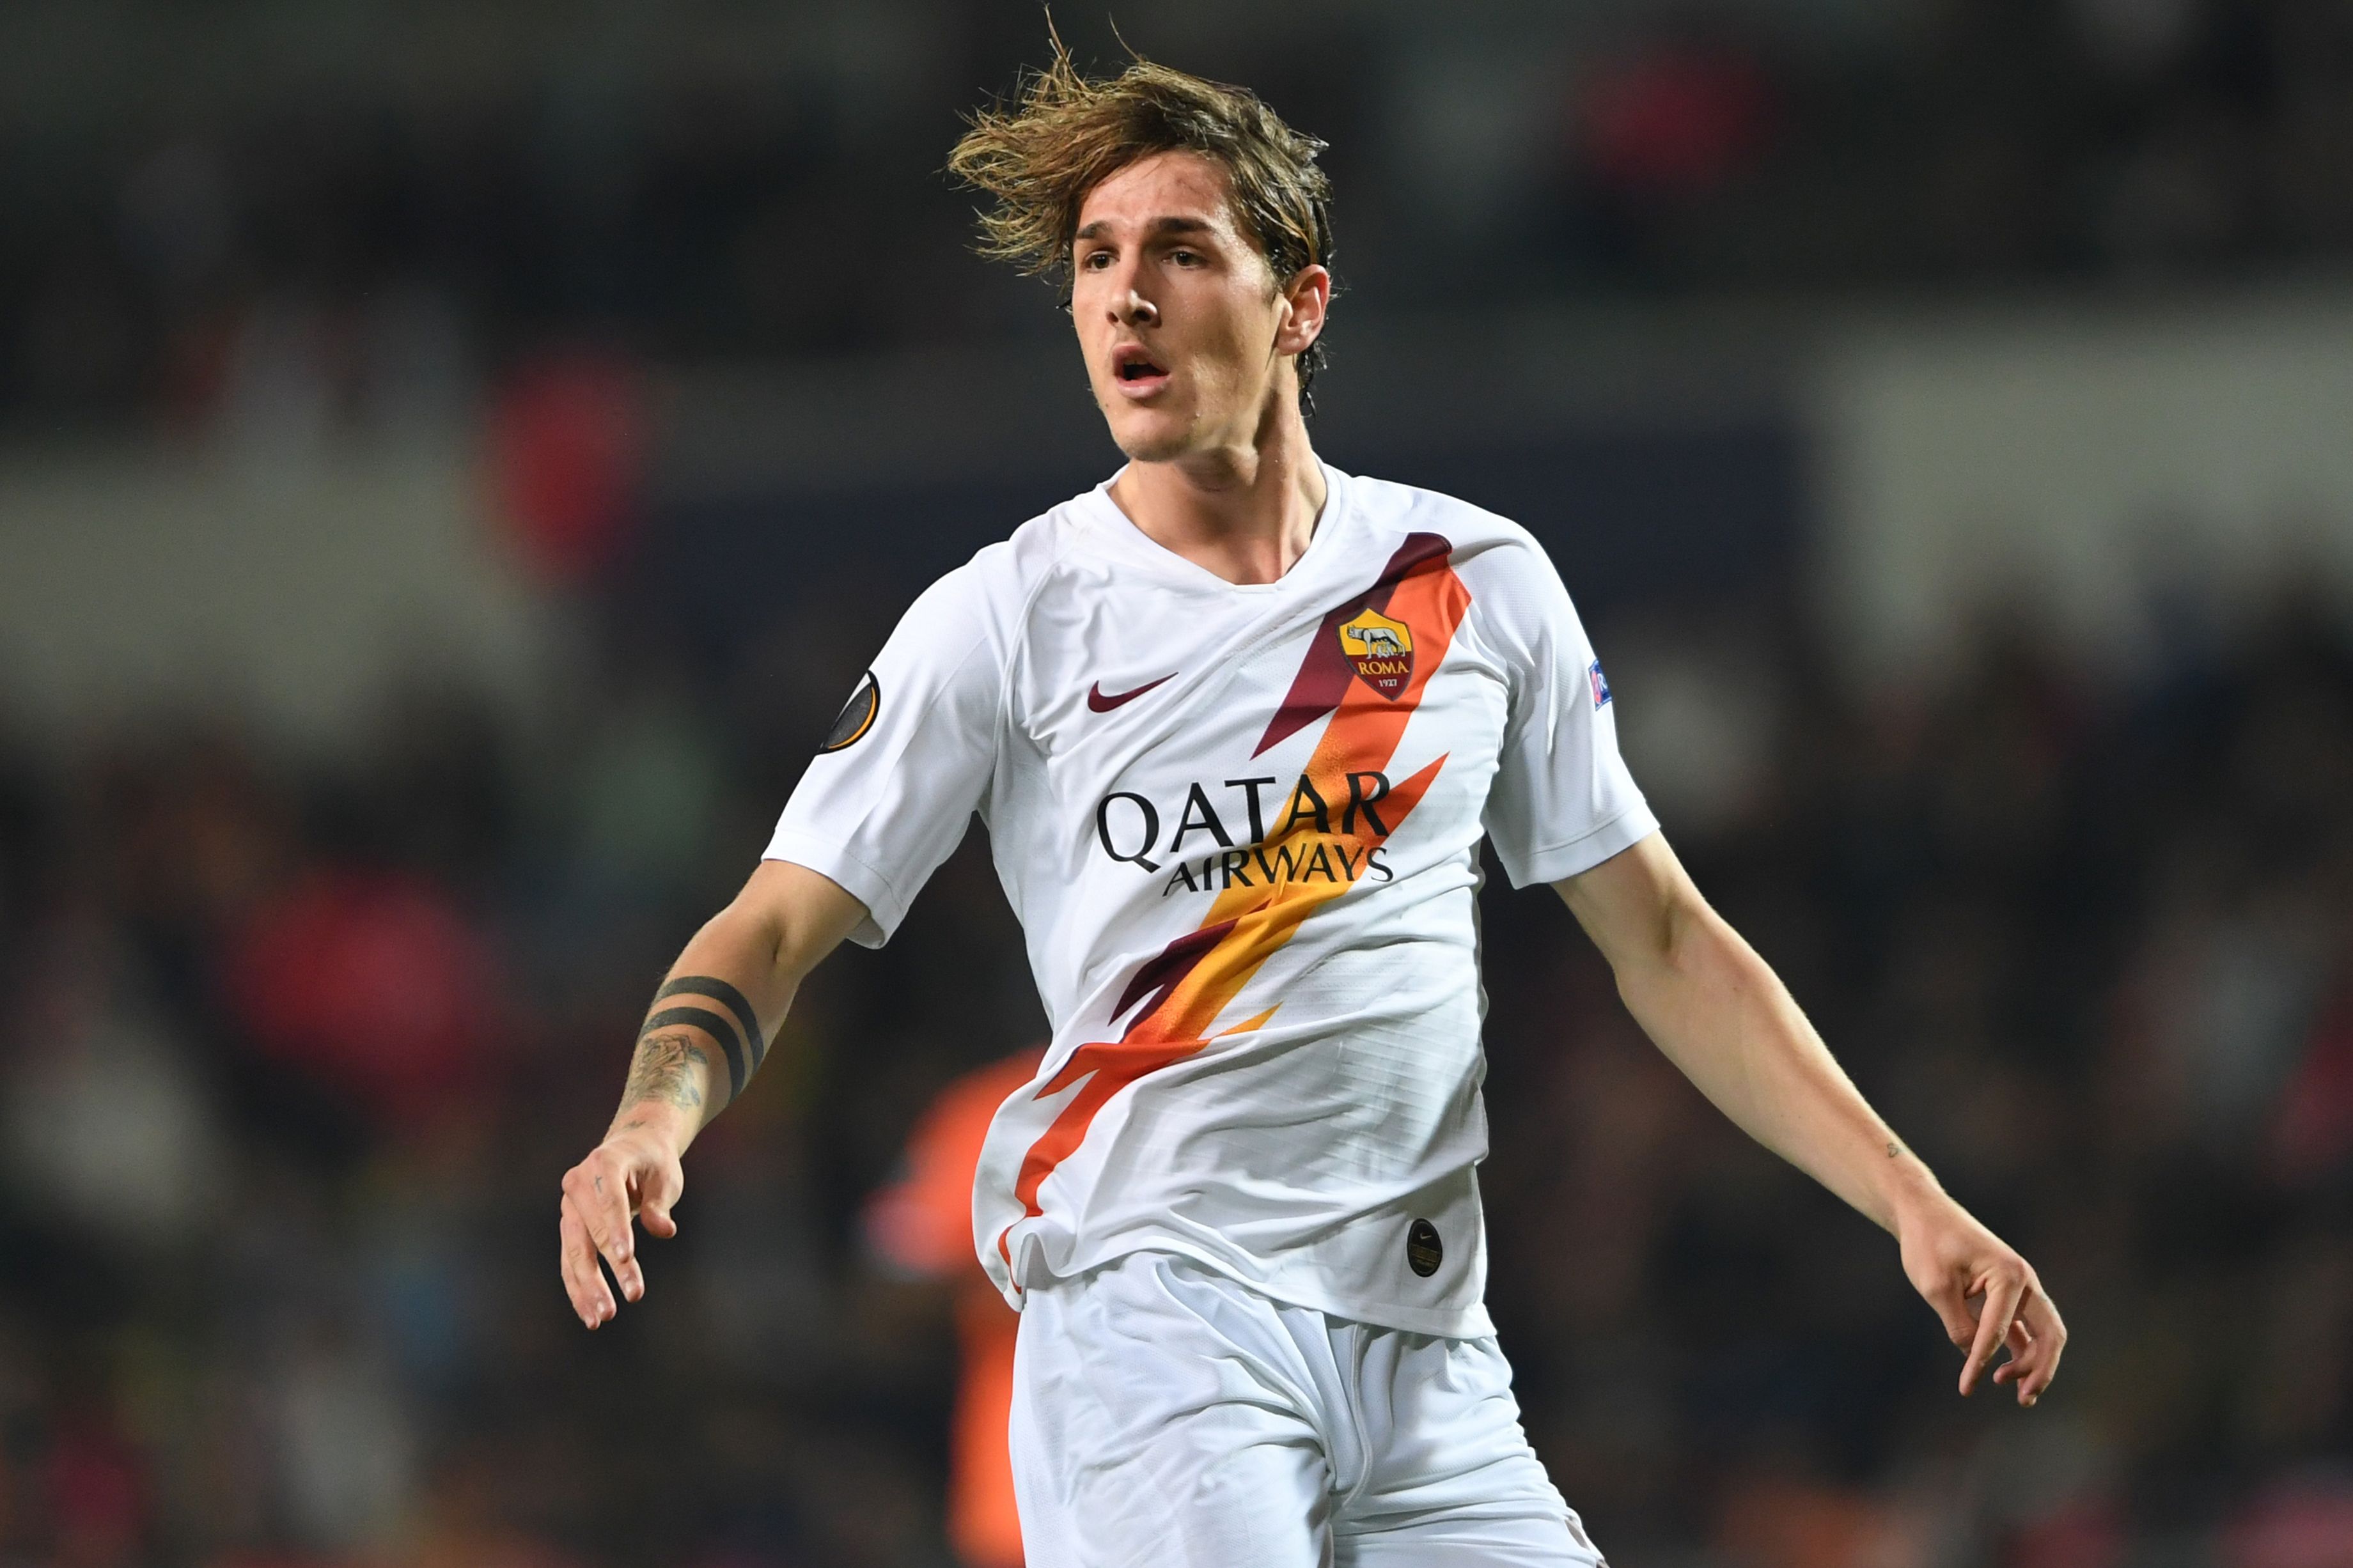 Zaniolo is a target for Tottenham (Photo by OZAN KOSE/AFP via Getty Images)